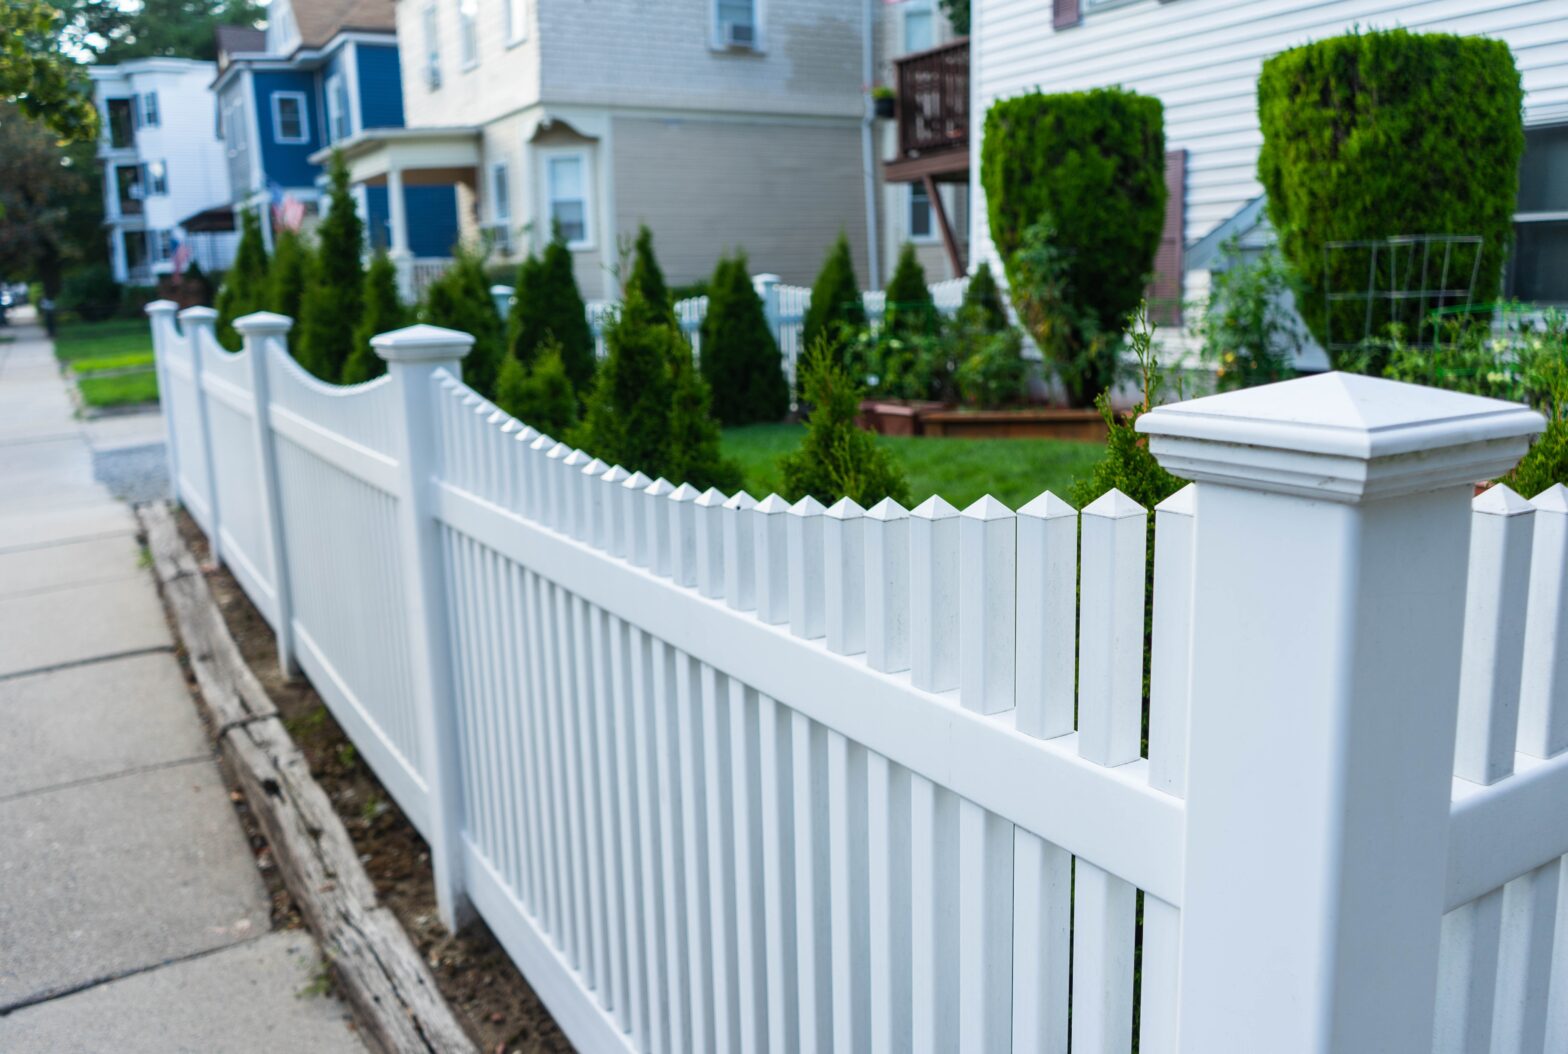 White picket fence residential neighborhood houses concept